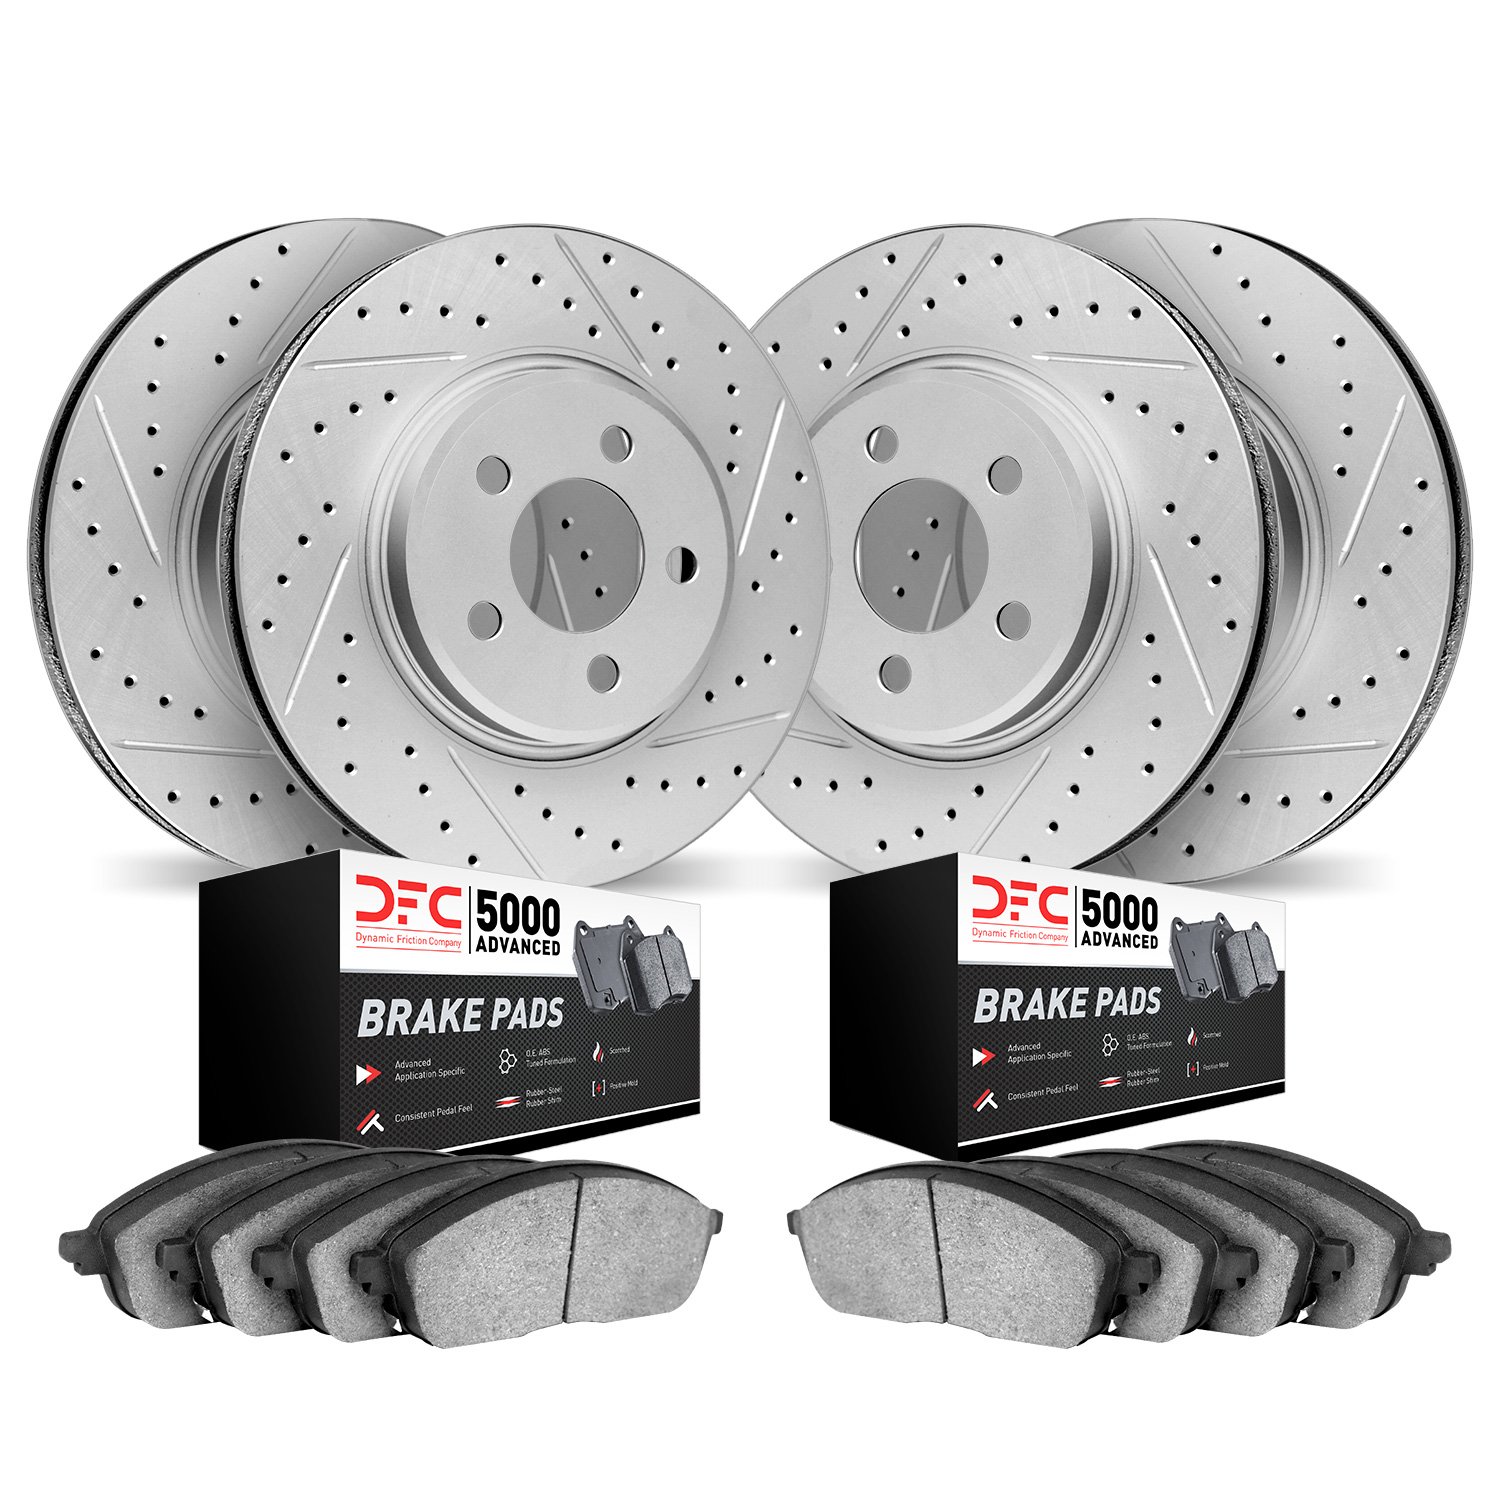 2504-13013 Geoperformance Drilled/Slotted Rotors w/5000 Advanced Brake Pads Kit, 2015-2015 Subaru, Position: Front and Rear